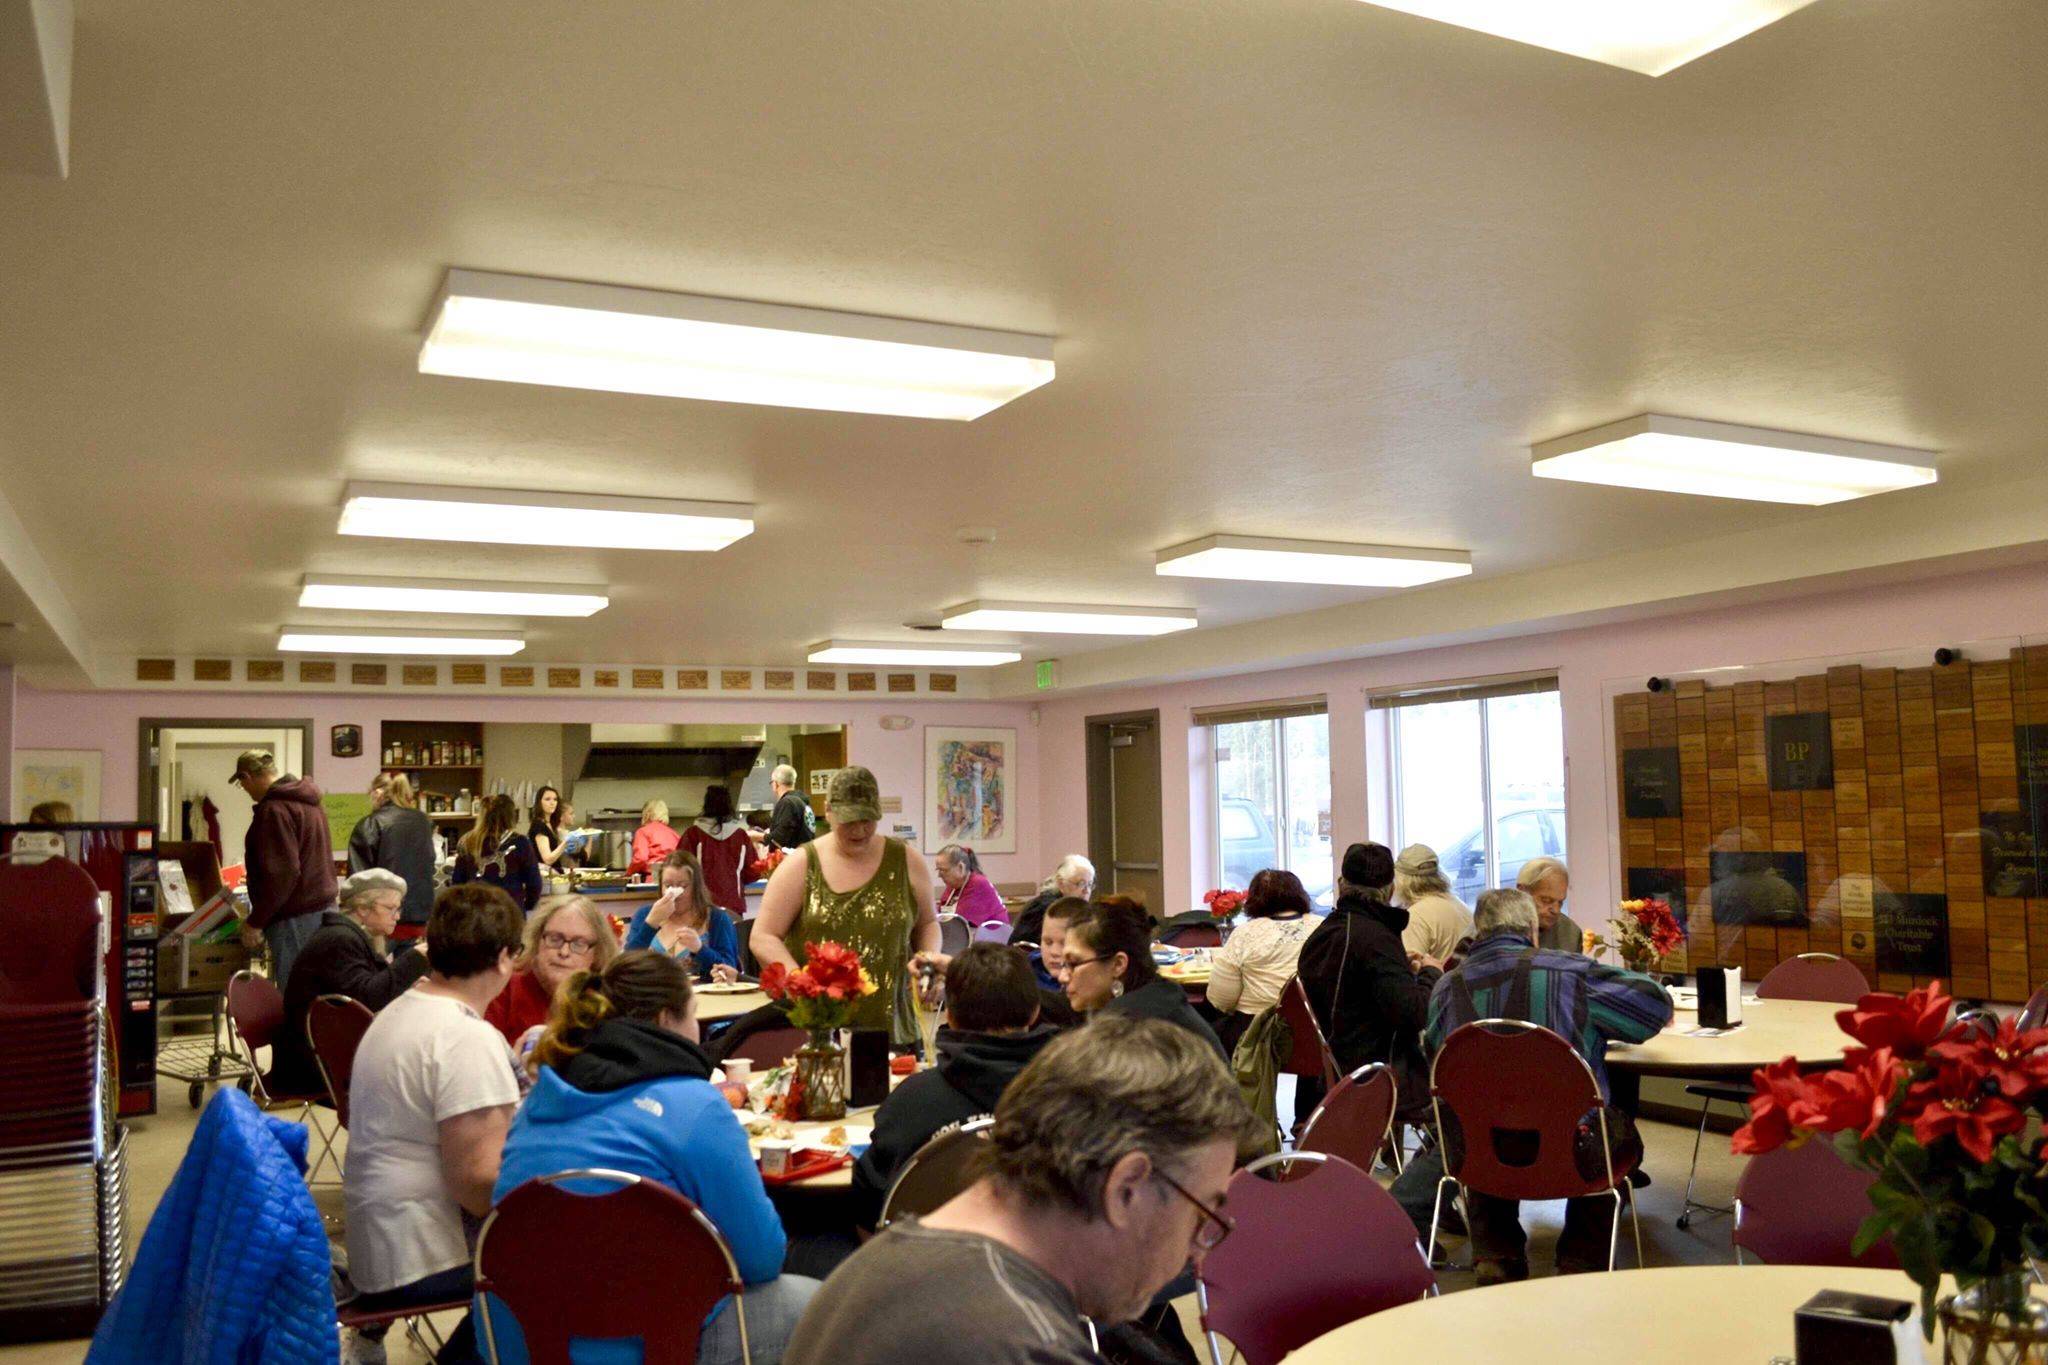 Kenai Peninsula Food Bank hosts an early Thanksgiving meal on Wednesday at their facility near Soldotna. (Photo by Victoria Petersen/Peninsula Clarion)